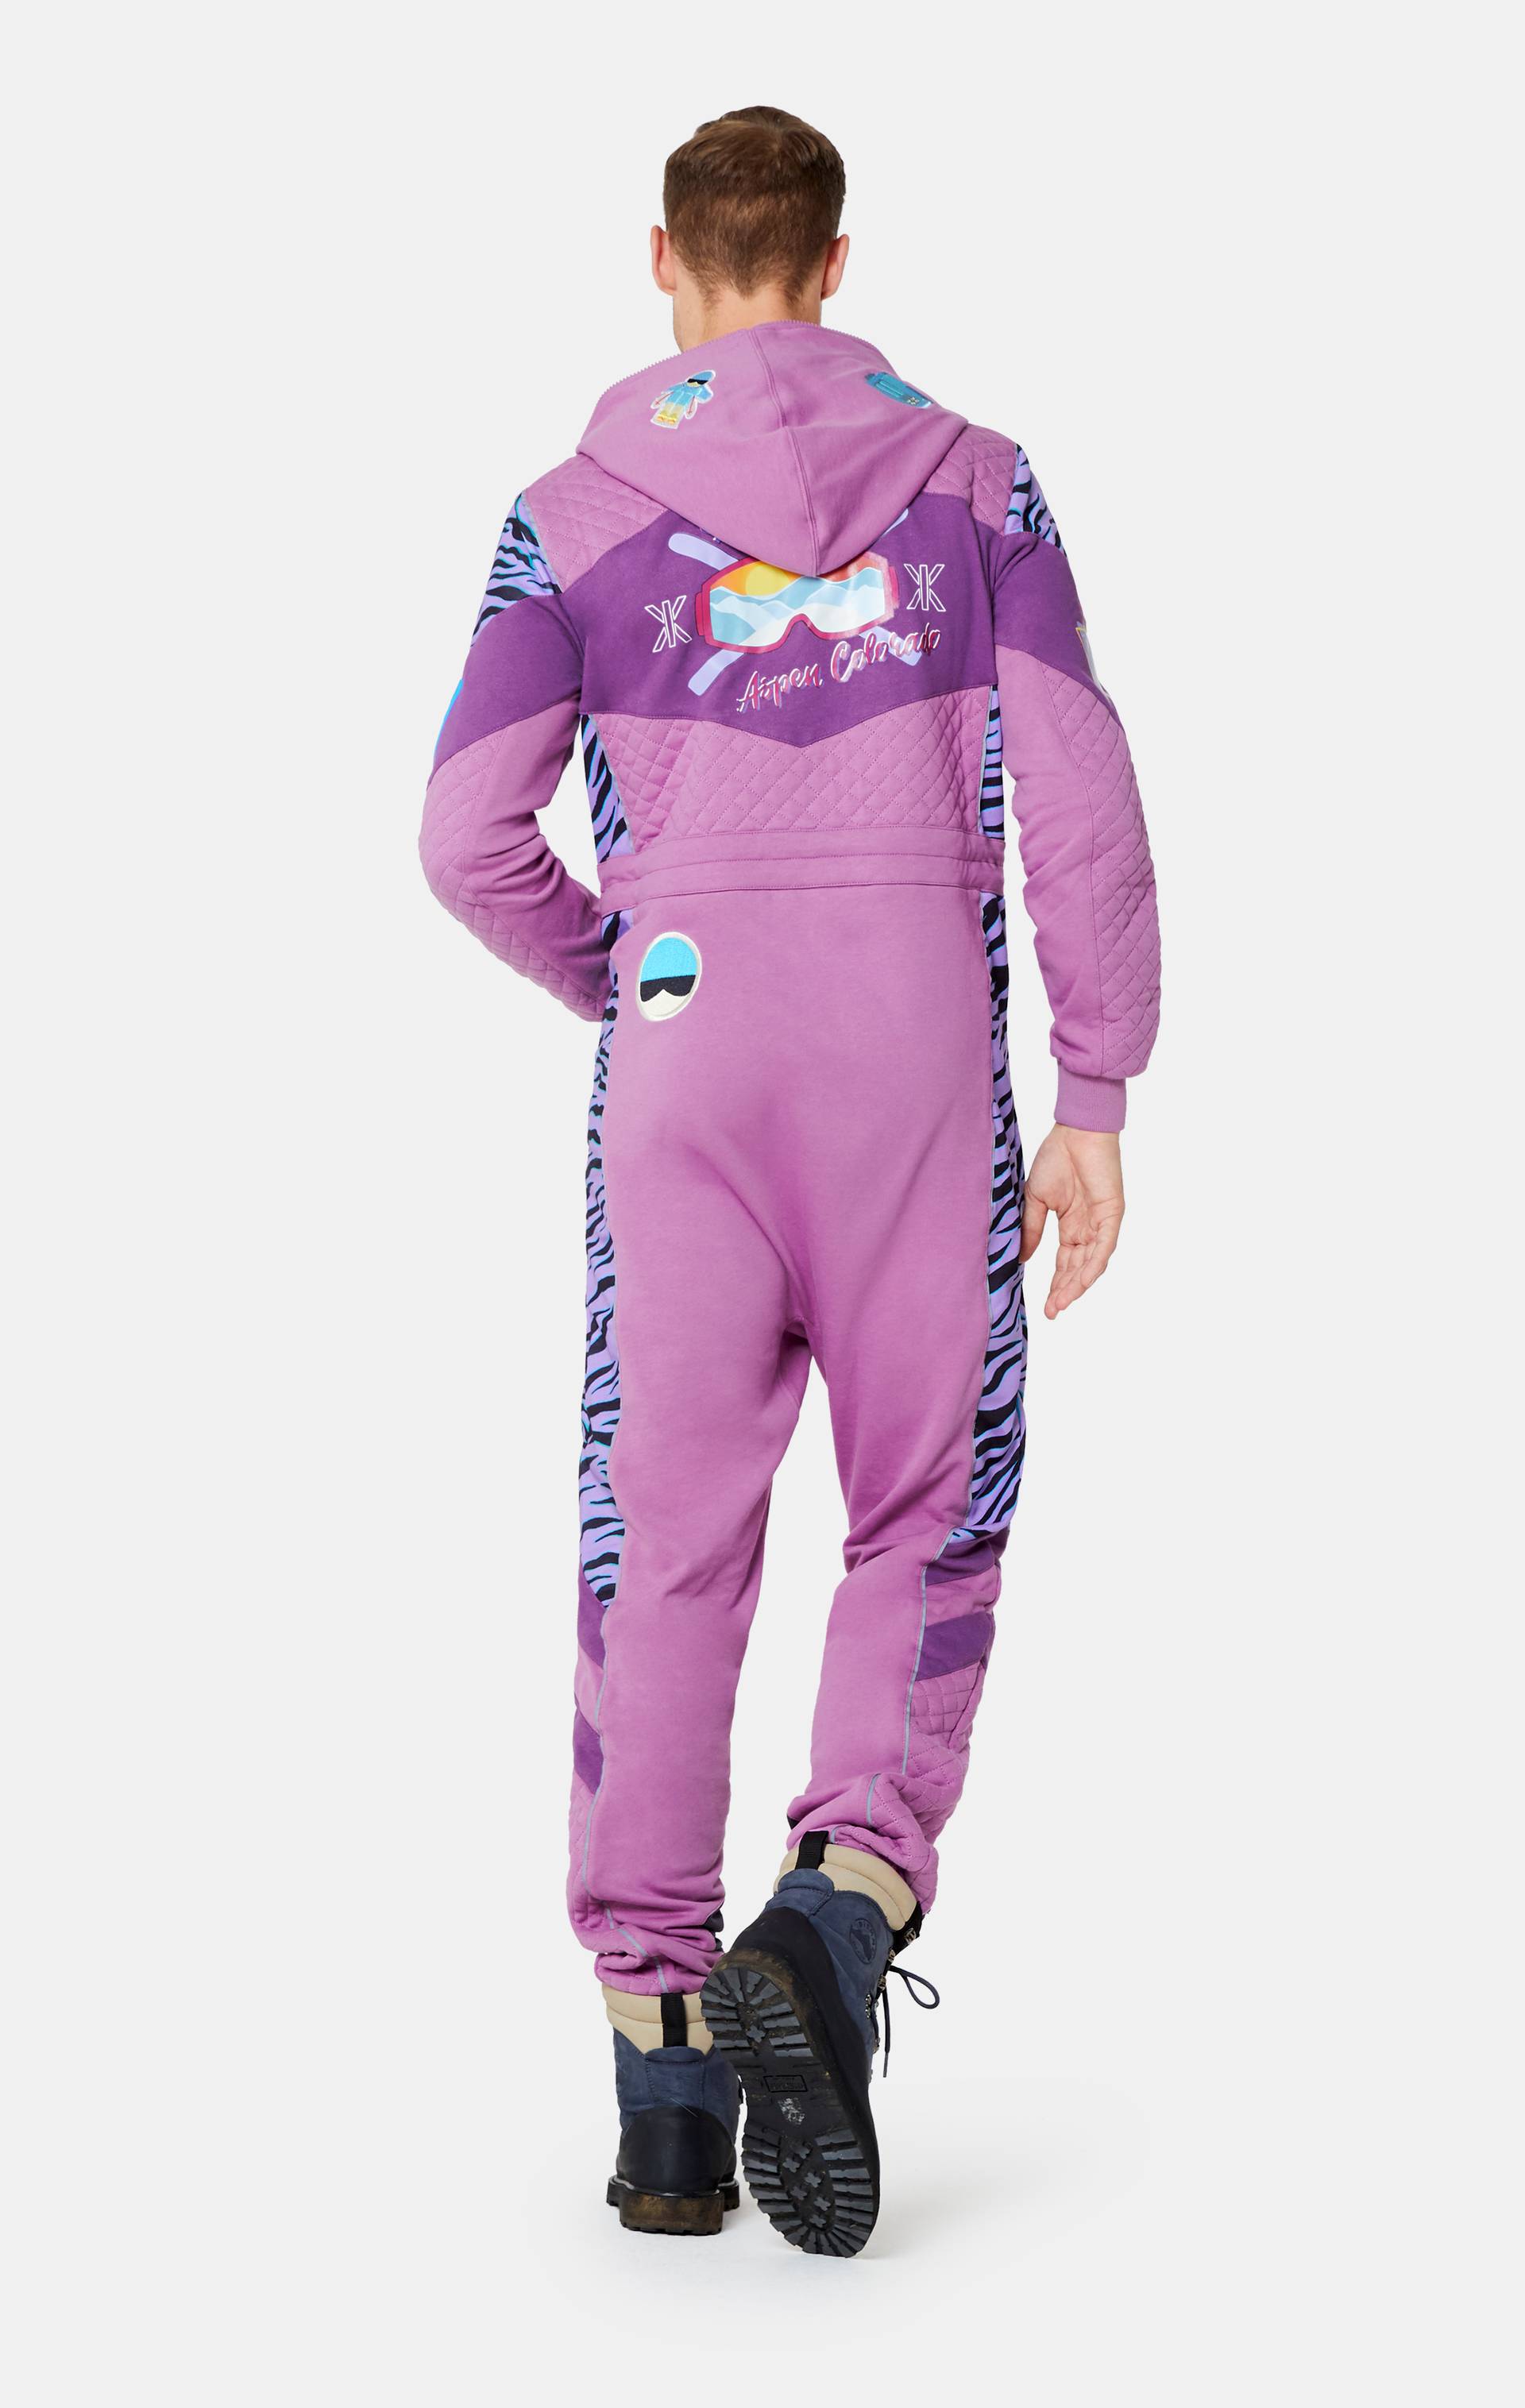 Onepiece Throwback Skiing Jumpsuit Pink - 3